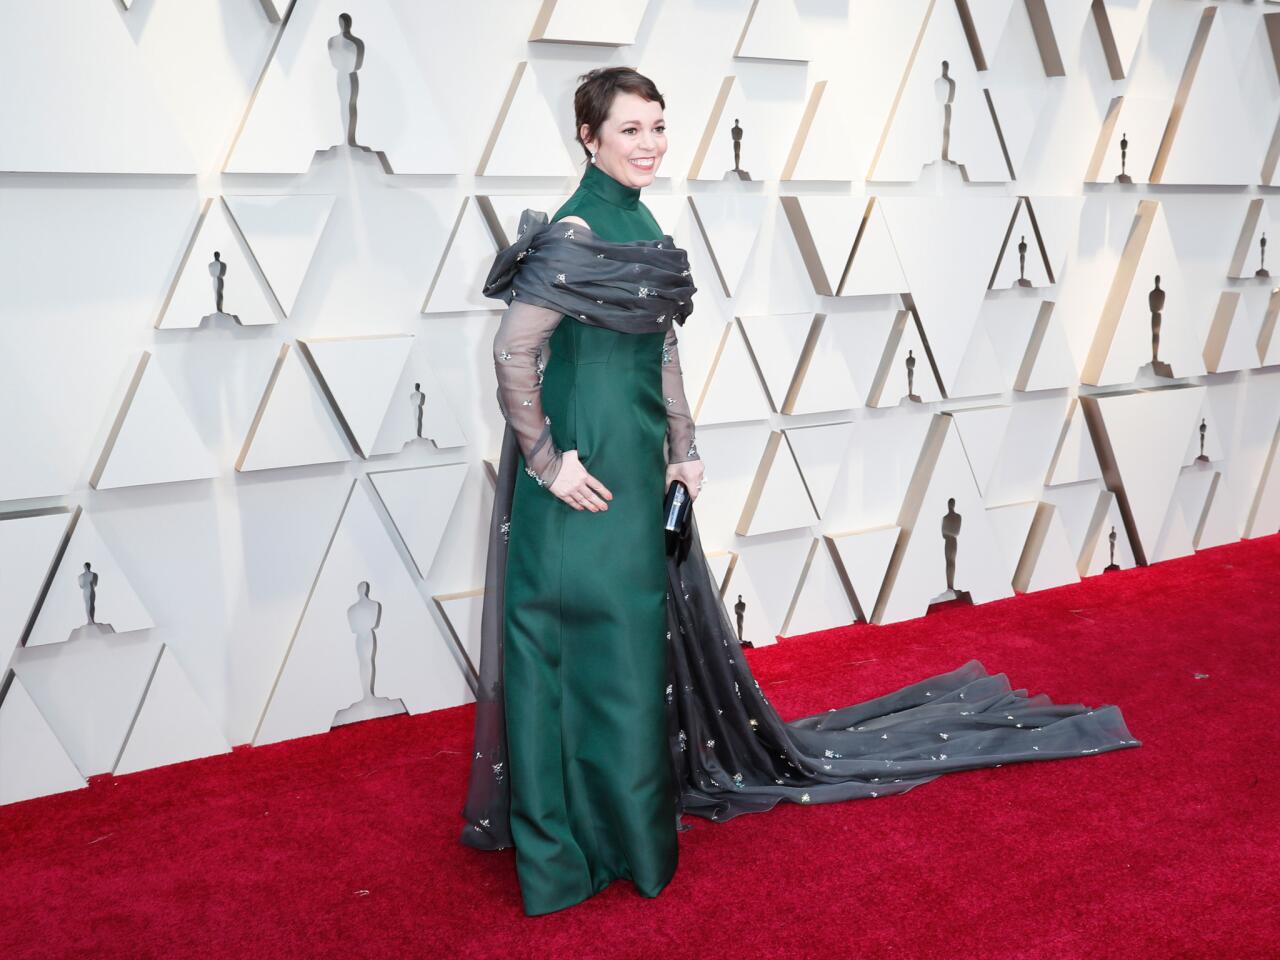 MISS: Olivia Colman looks as if she's a new baby being swaddled, albeit in a gorgeous Prada gown inspired by her stylist's trips through the desert.